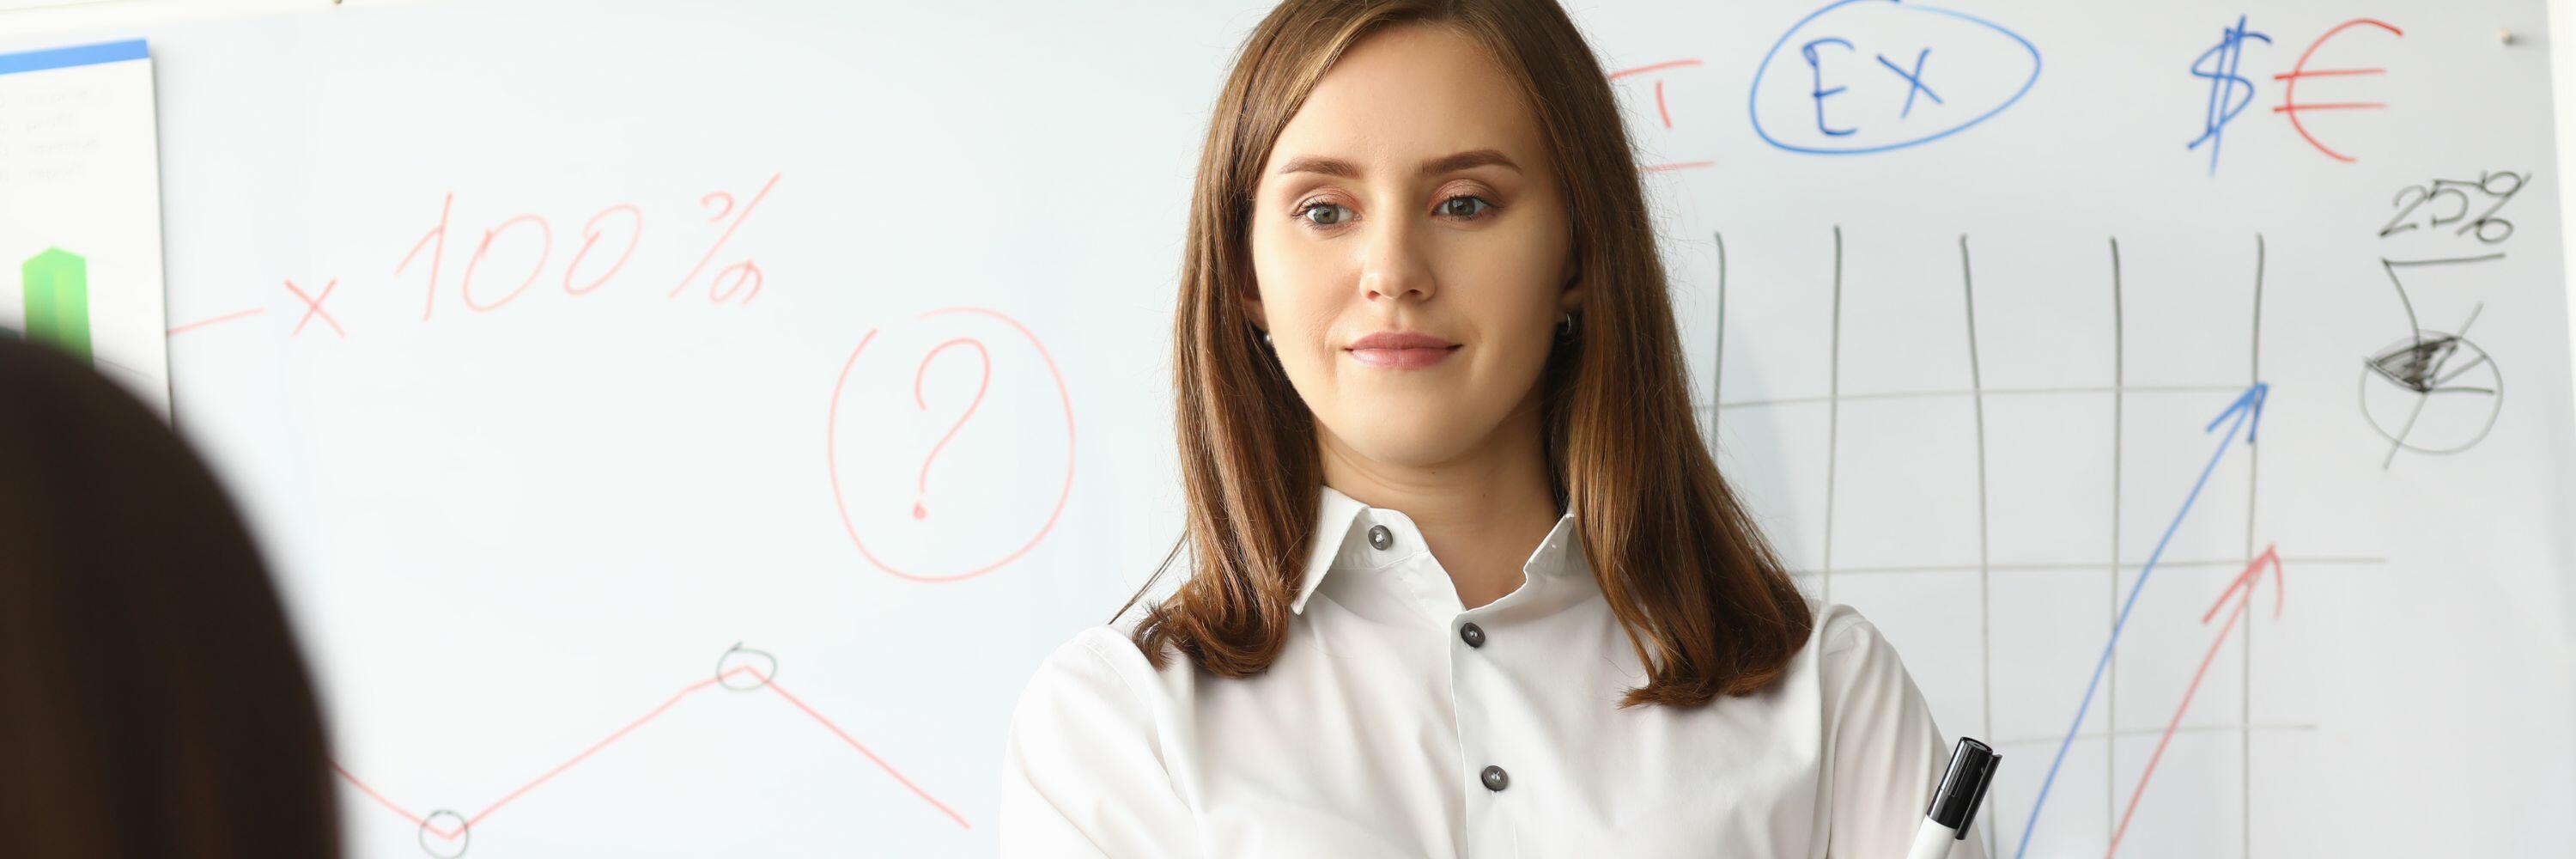 A woman in white top with brown hair standing in front of a whiteboard with notes on it